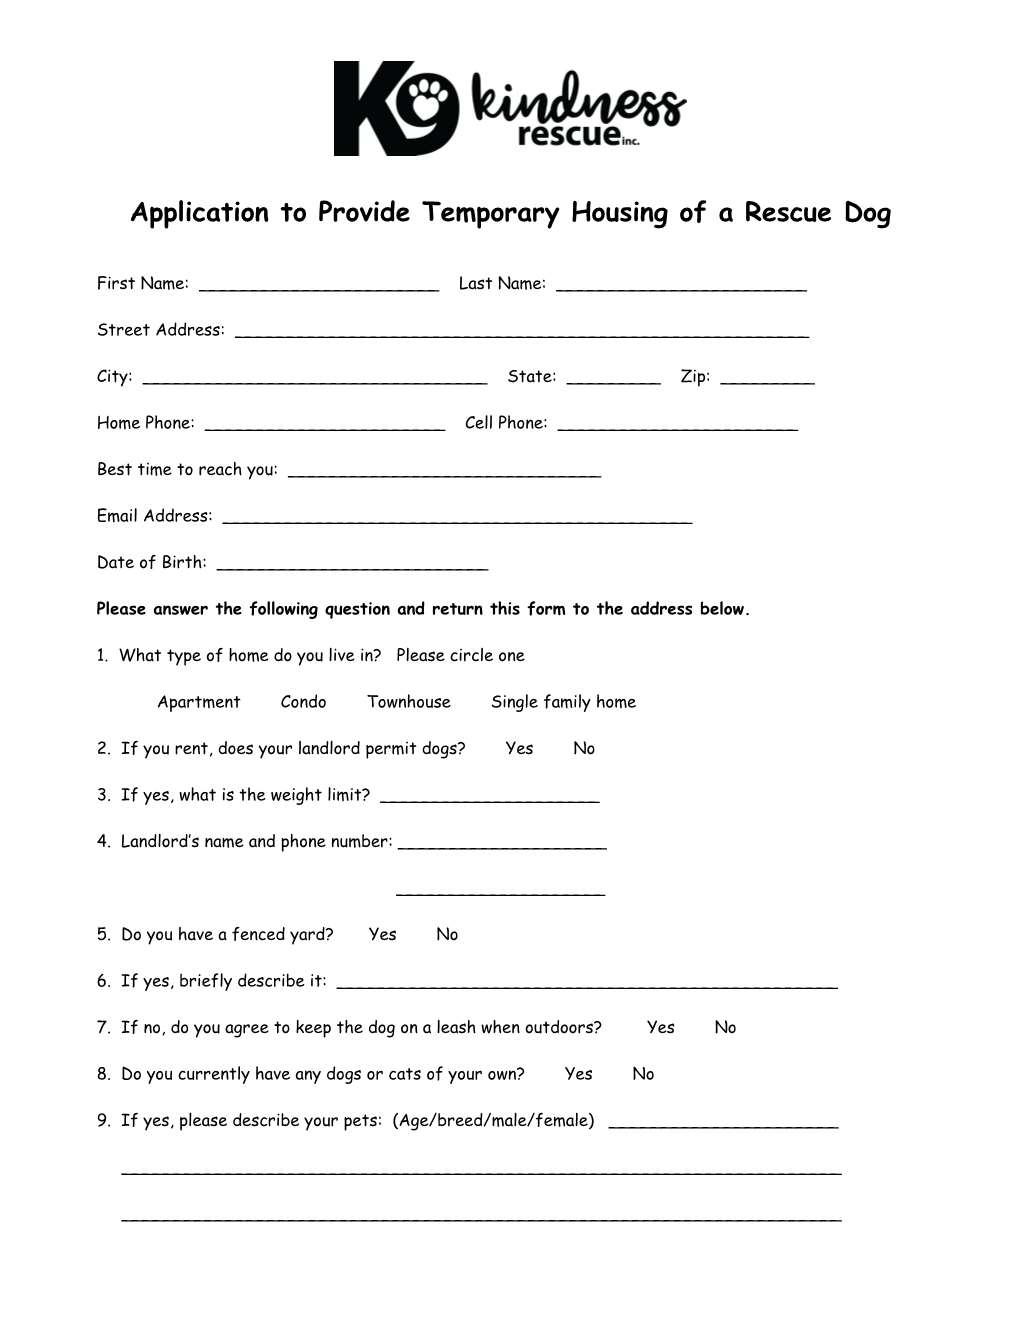 Application to Provide Temporary Housing of a Rescue Dog